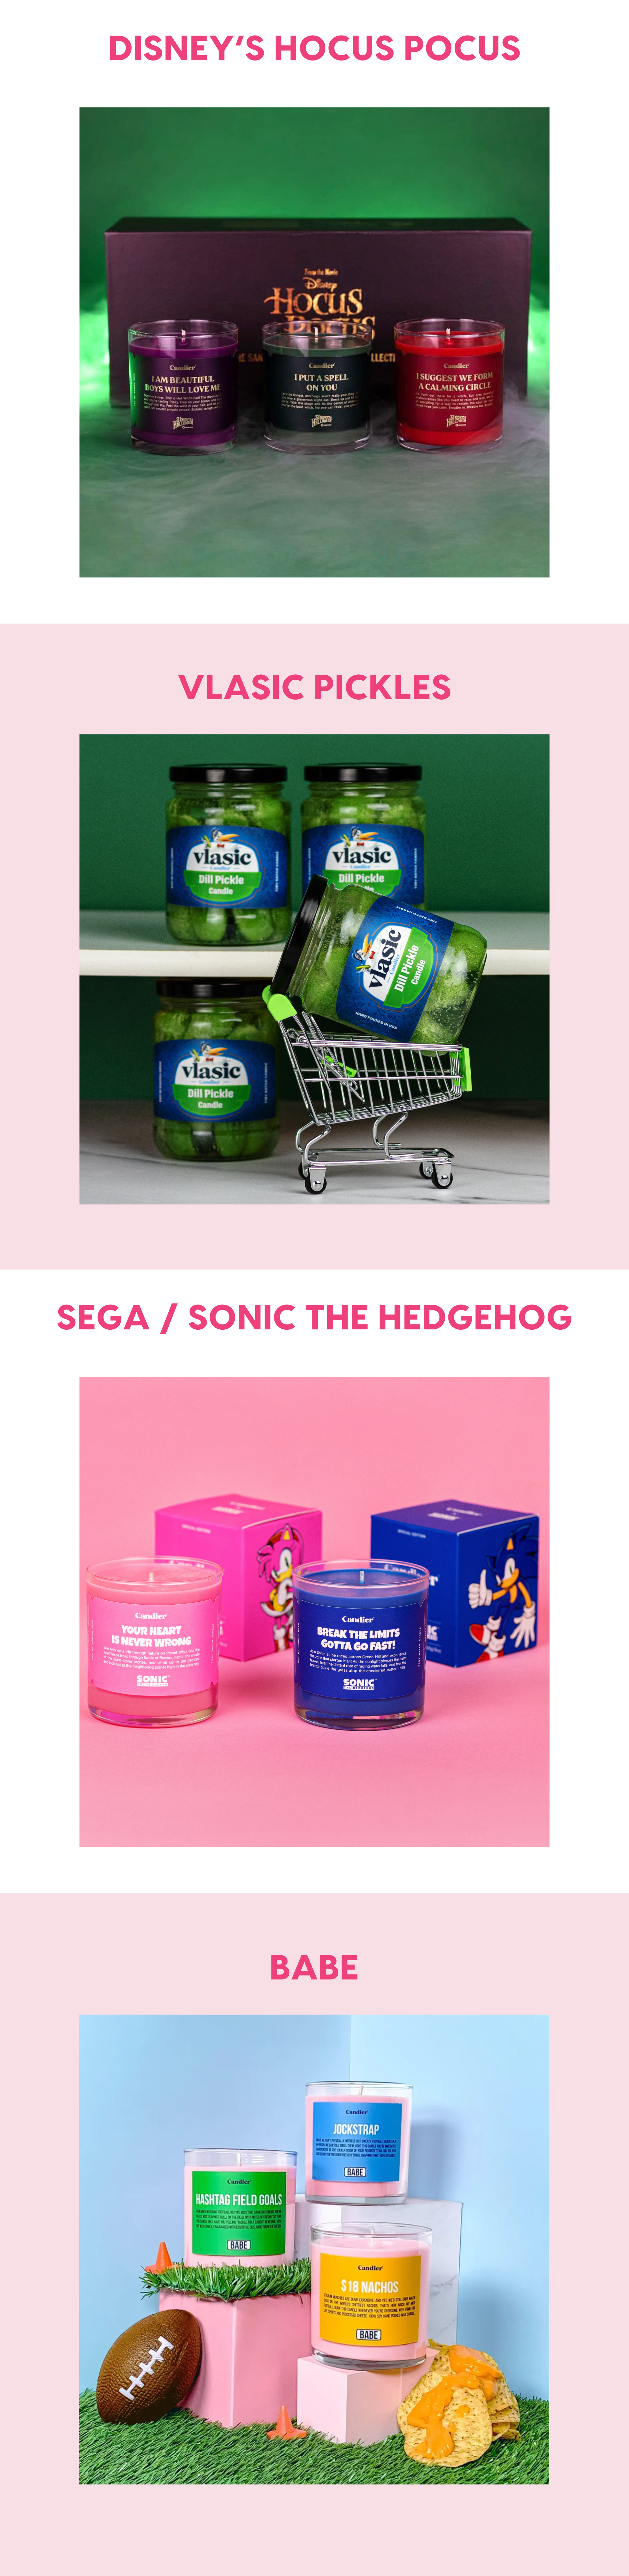 Hocus Pocus, Vlasic Pickles, SEGA, Sonic The Hedgehog and BABE collab candles